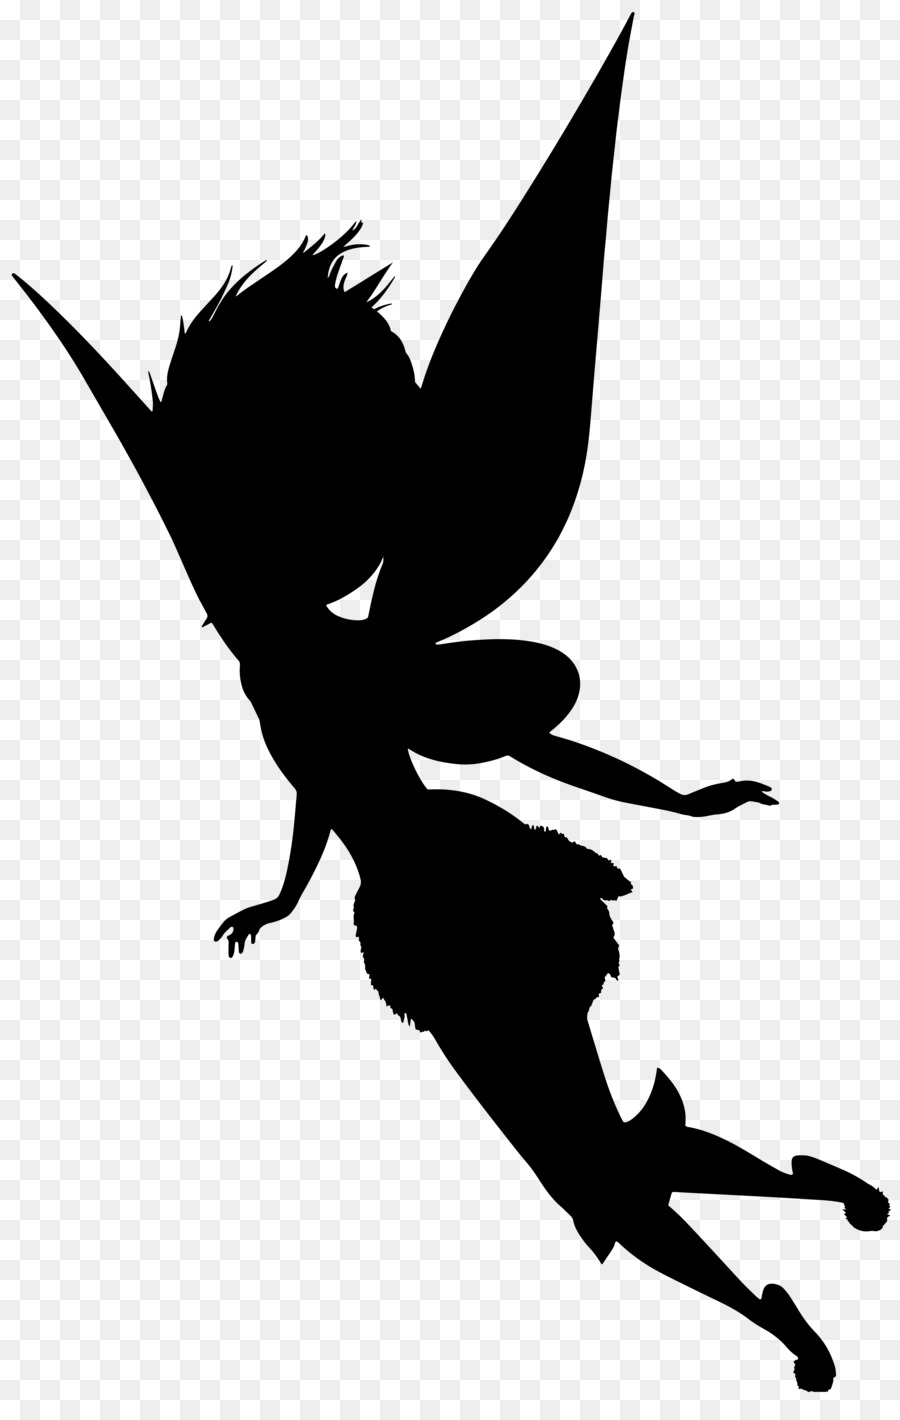 Fairy Drawing Pixie Clip art - pixie dust png download - 5127*8000 - Free Transparent Fairy png Download.